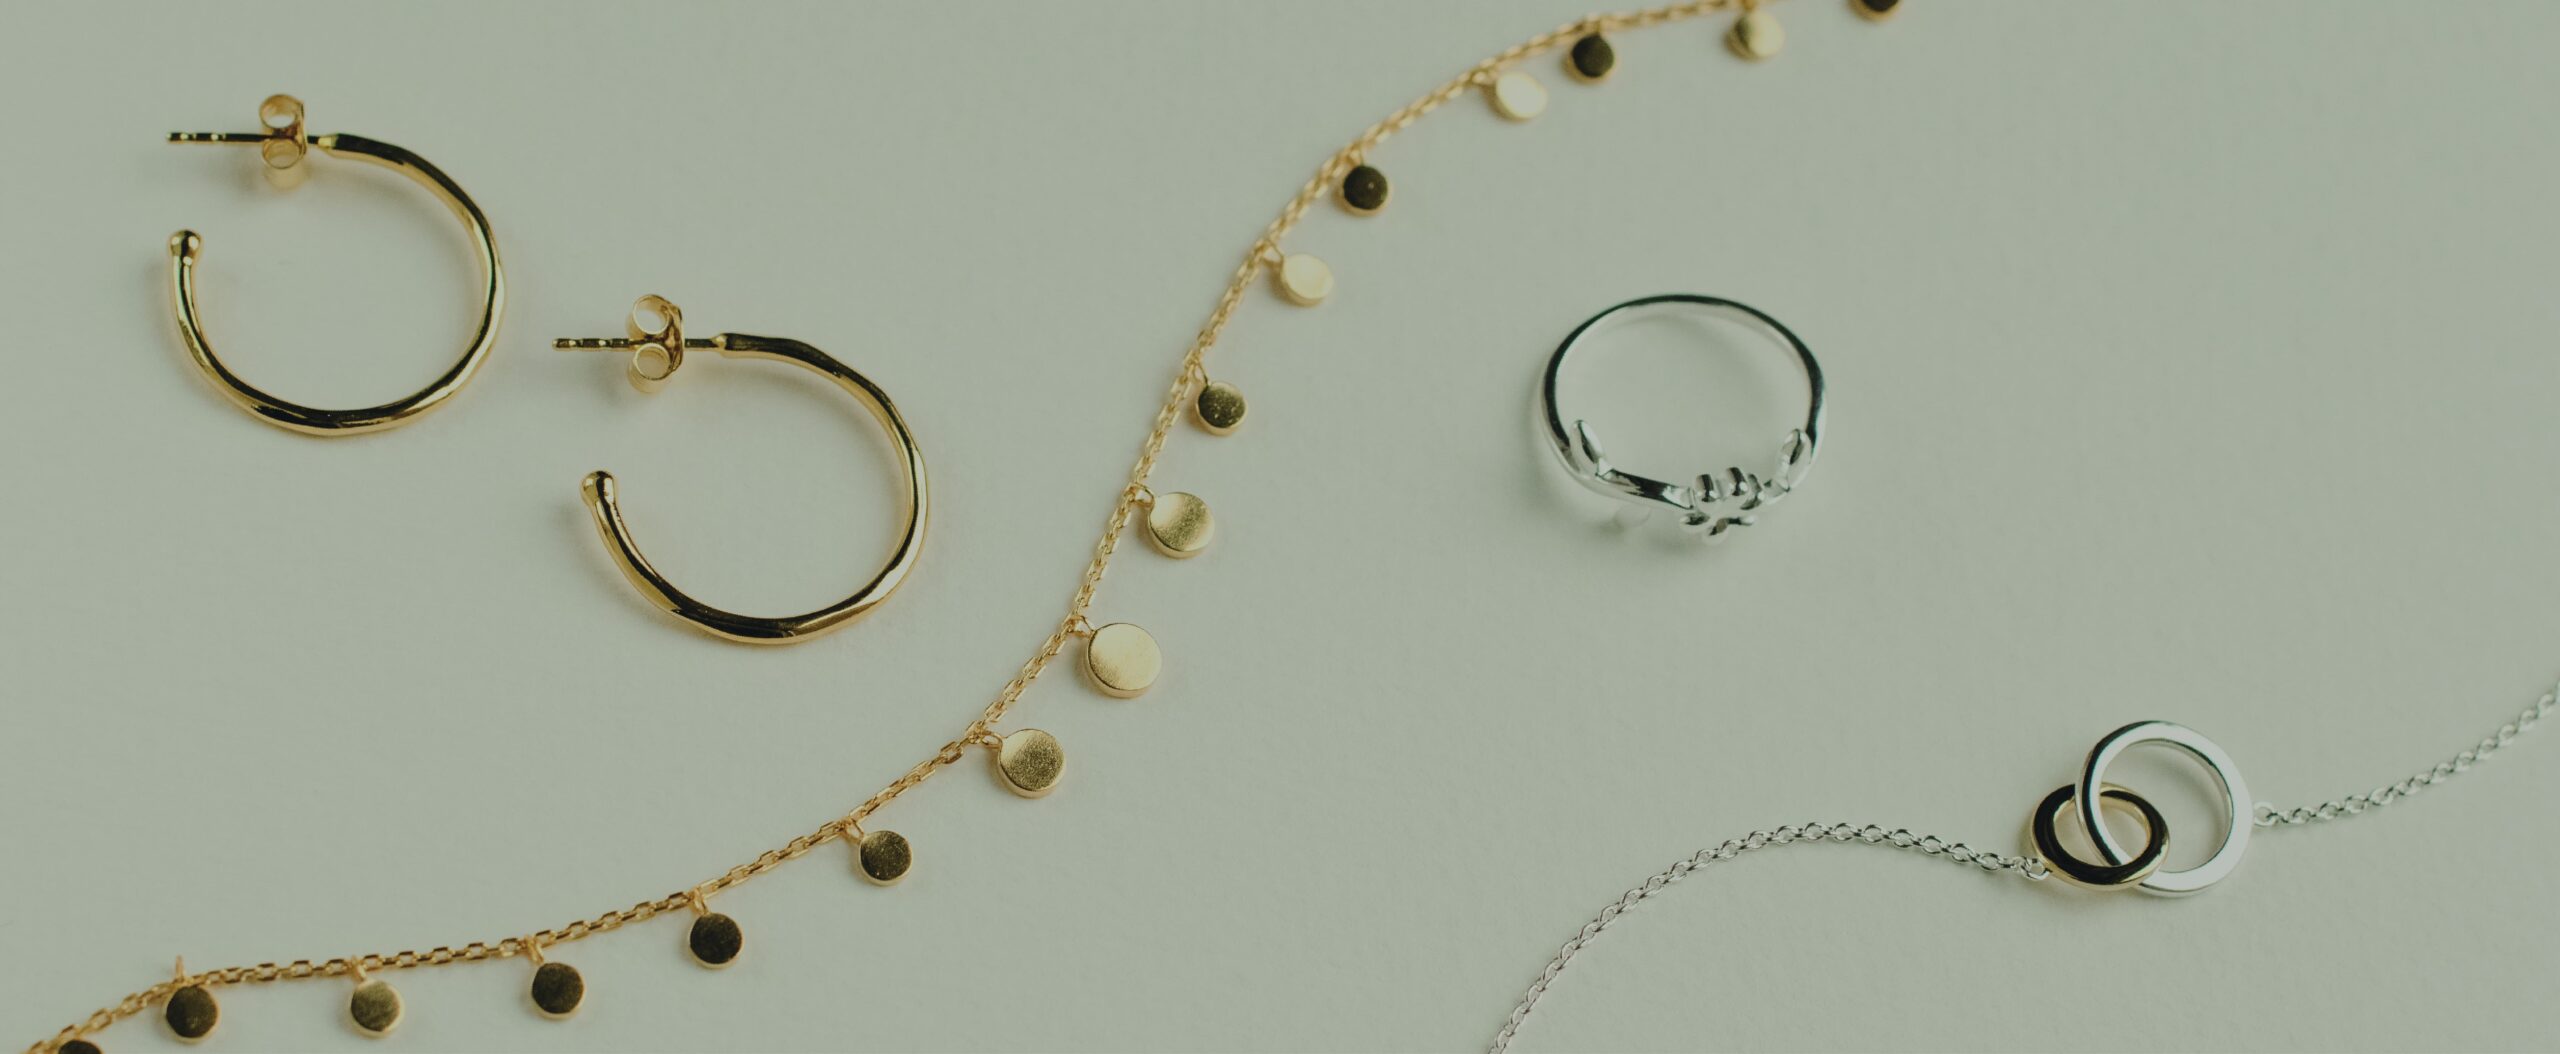 Most loved jewellery from Silverado